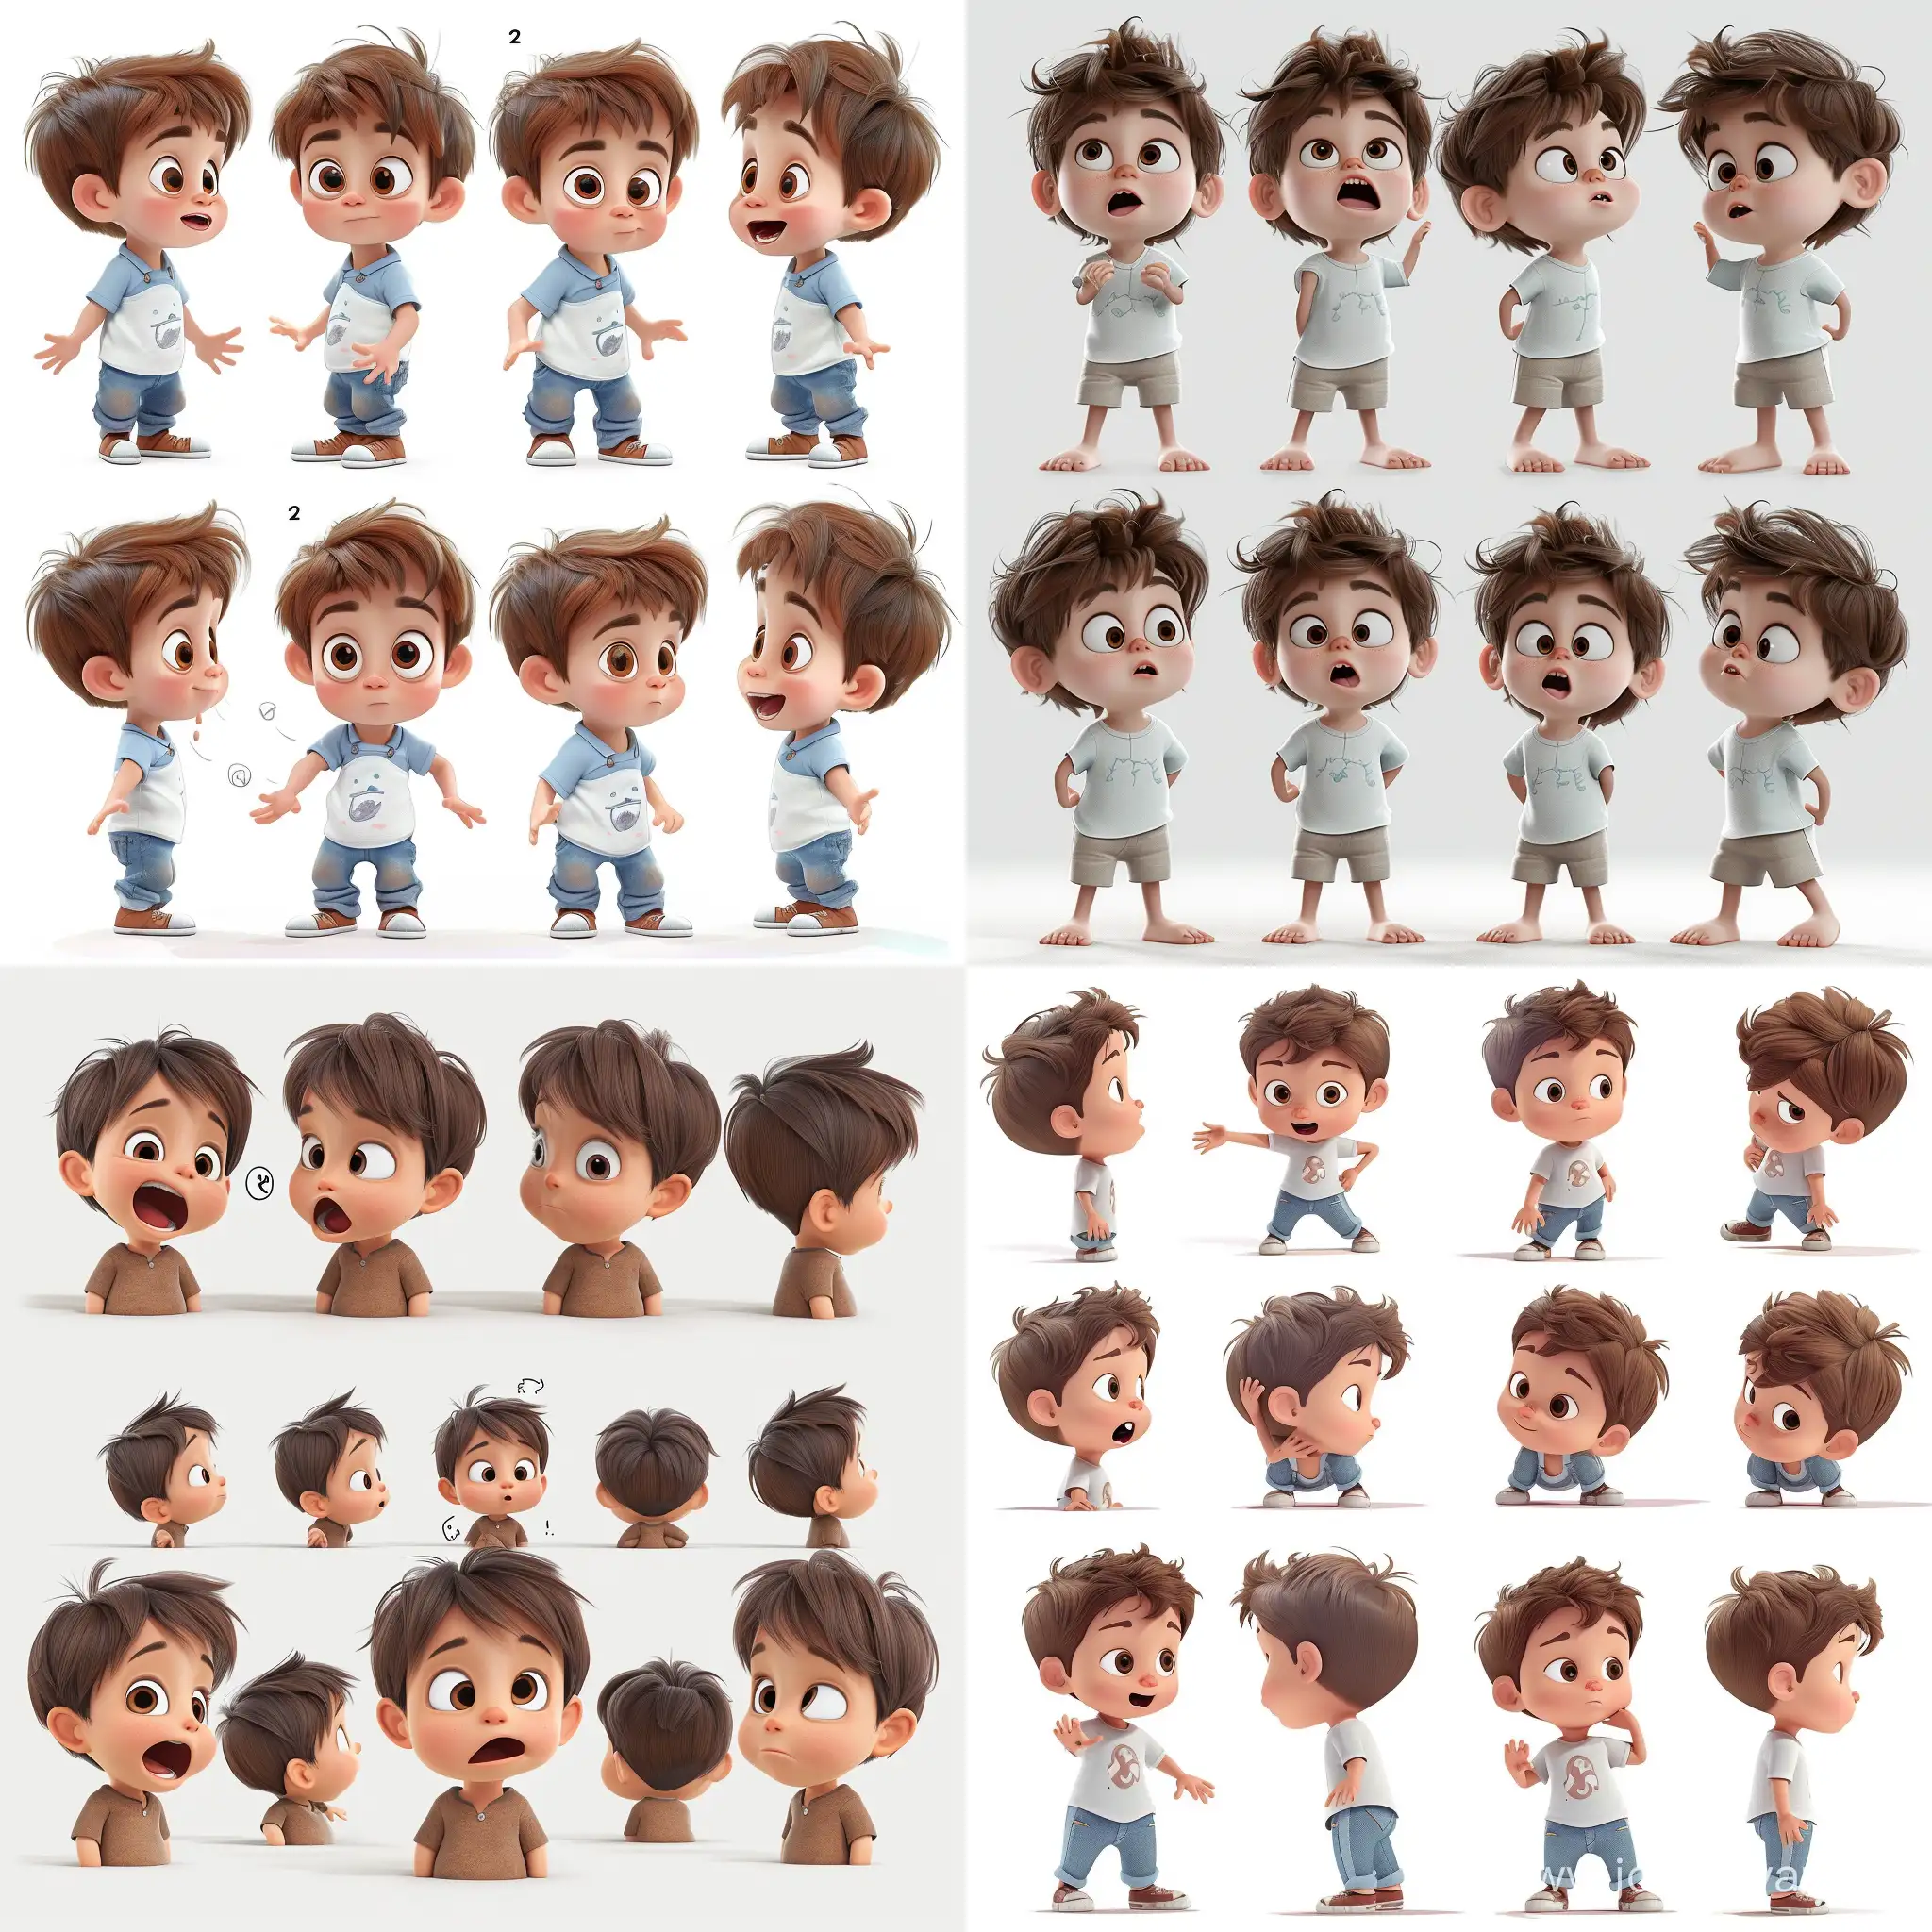 Adorable-OneYearOld-Boy-with-Brown-Hair-and-Expressive-Poses-3D-Cartoon-Illustration